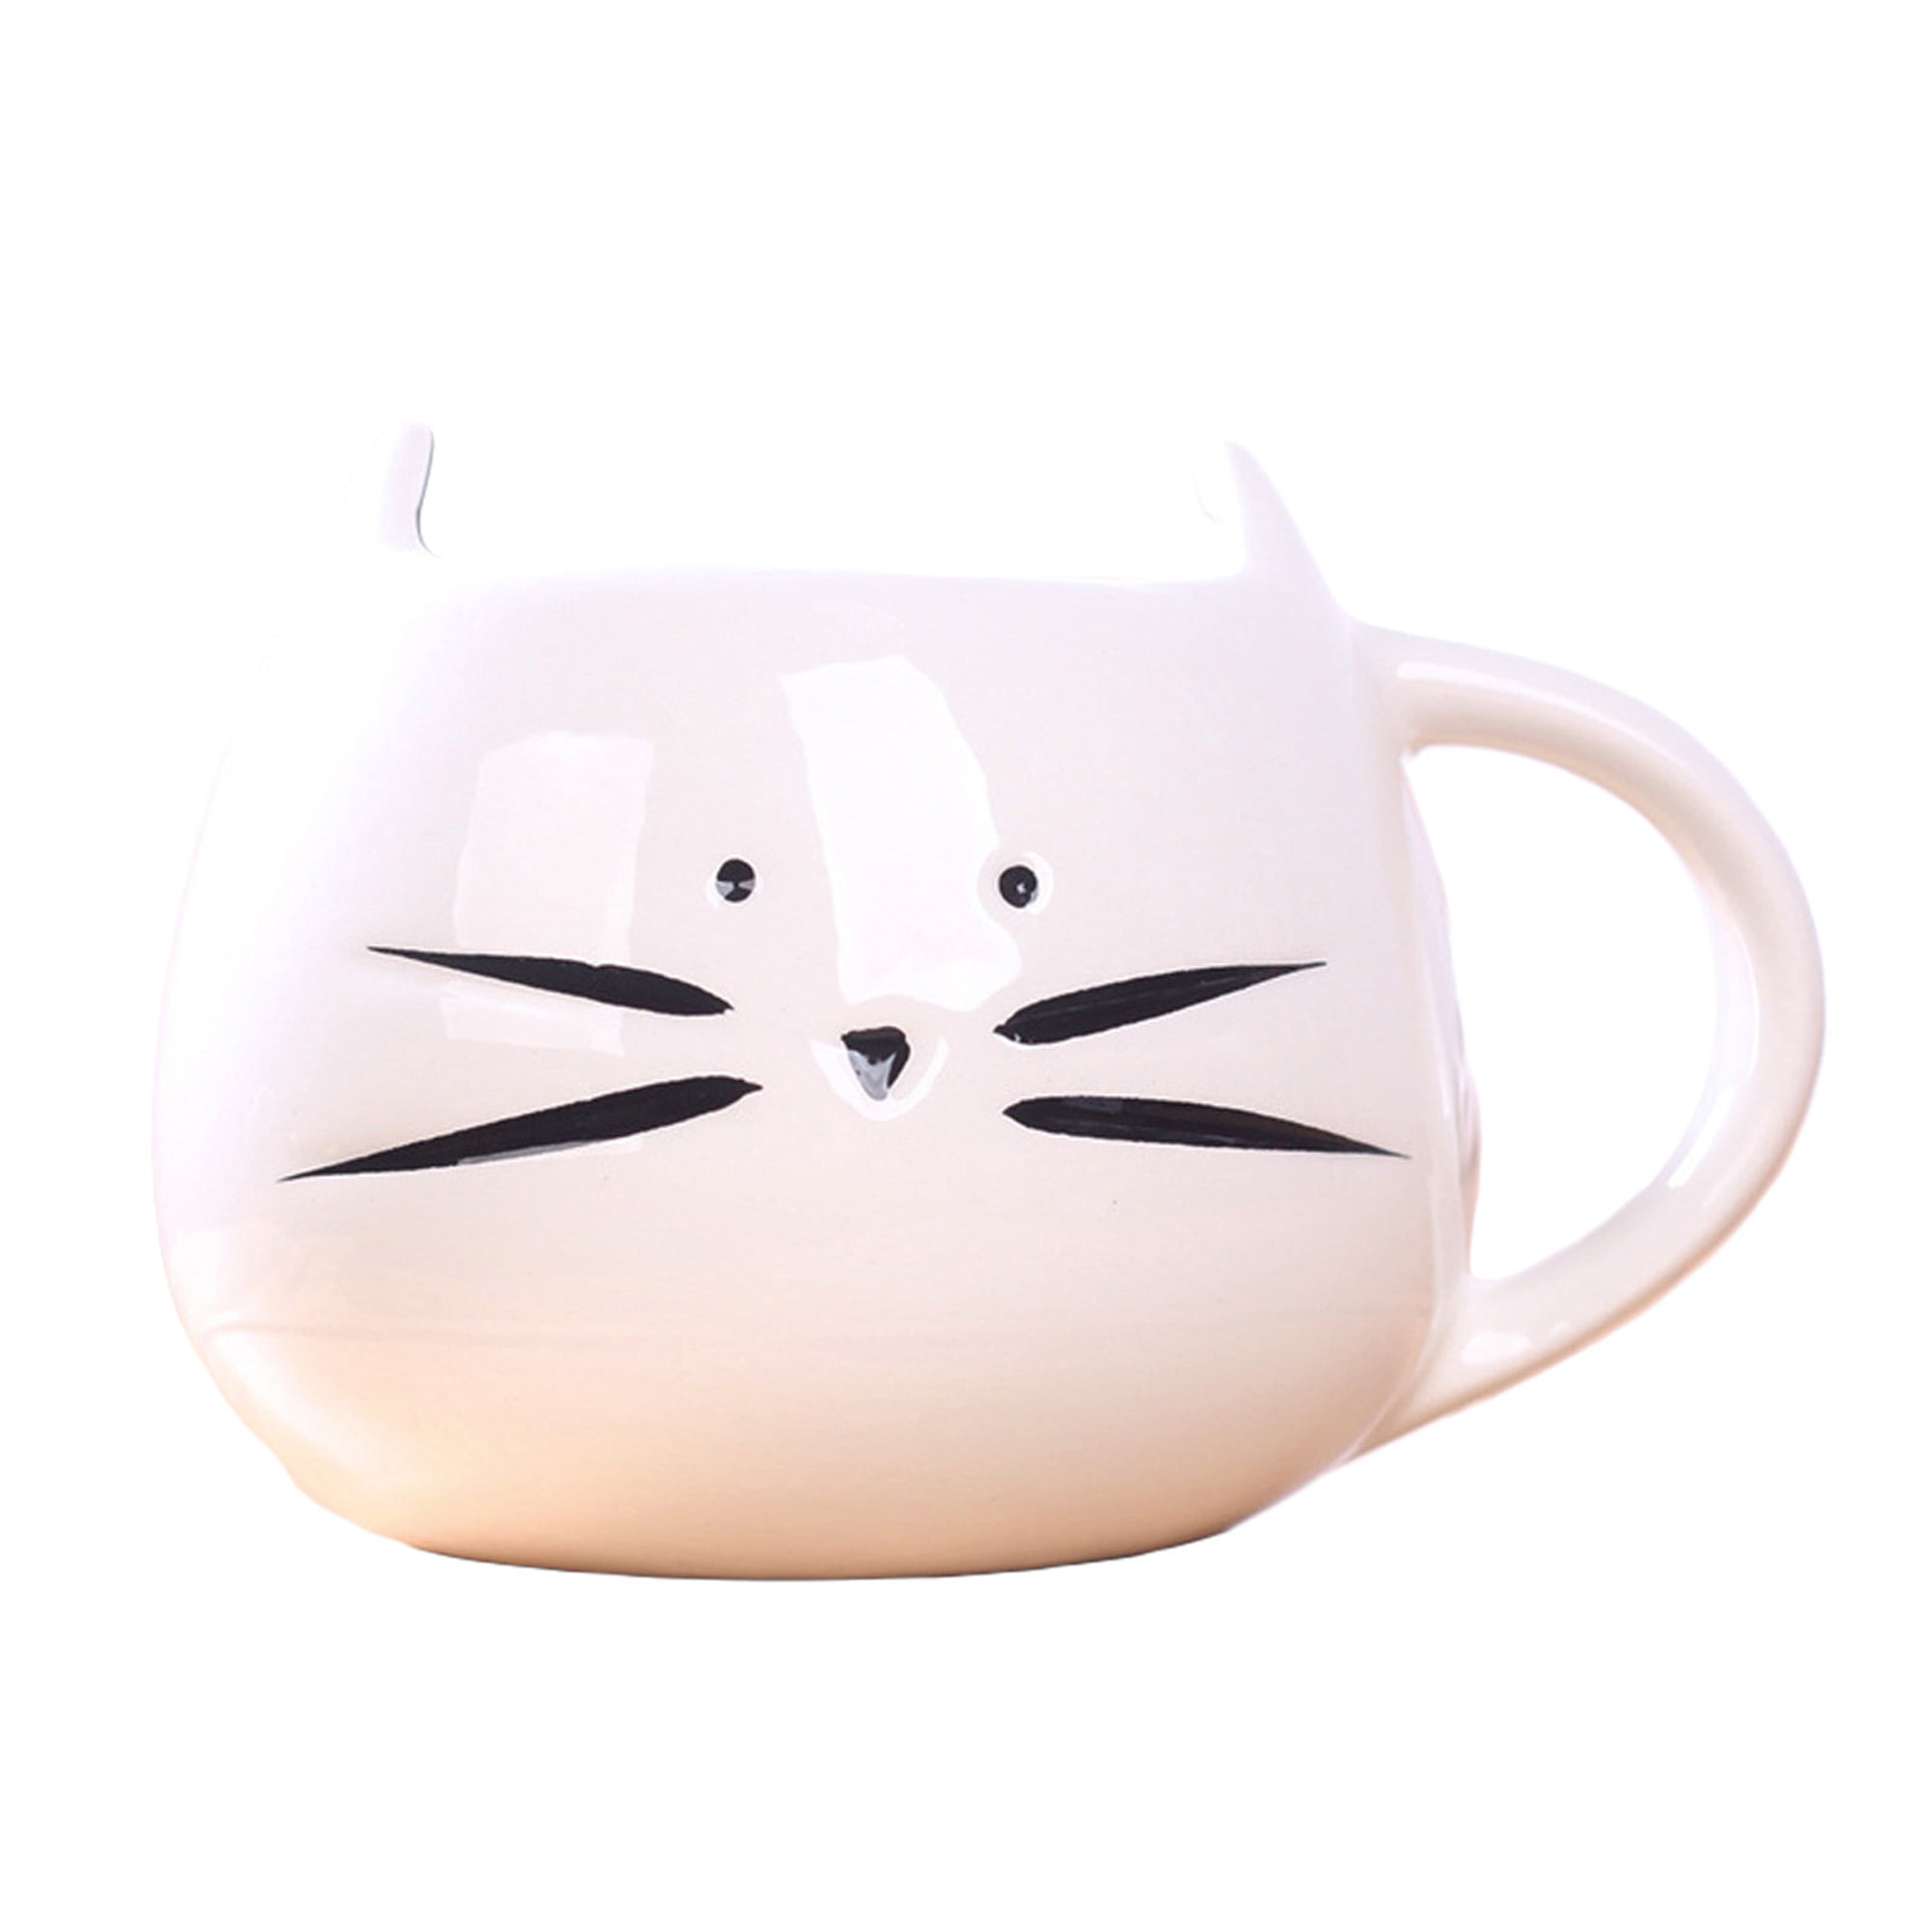 Cute Cartoon Sesame Cat Ceramic Mug Heat Resistant Milk Cup Coffee Cup For  Kids Perfect Breakfast Cup And Gift For Friends From Keyigou4, $15.46